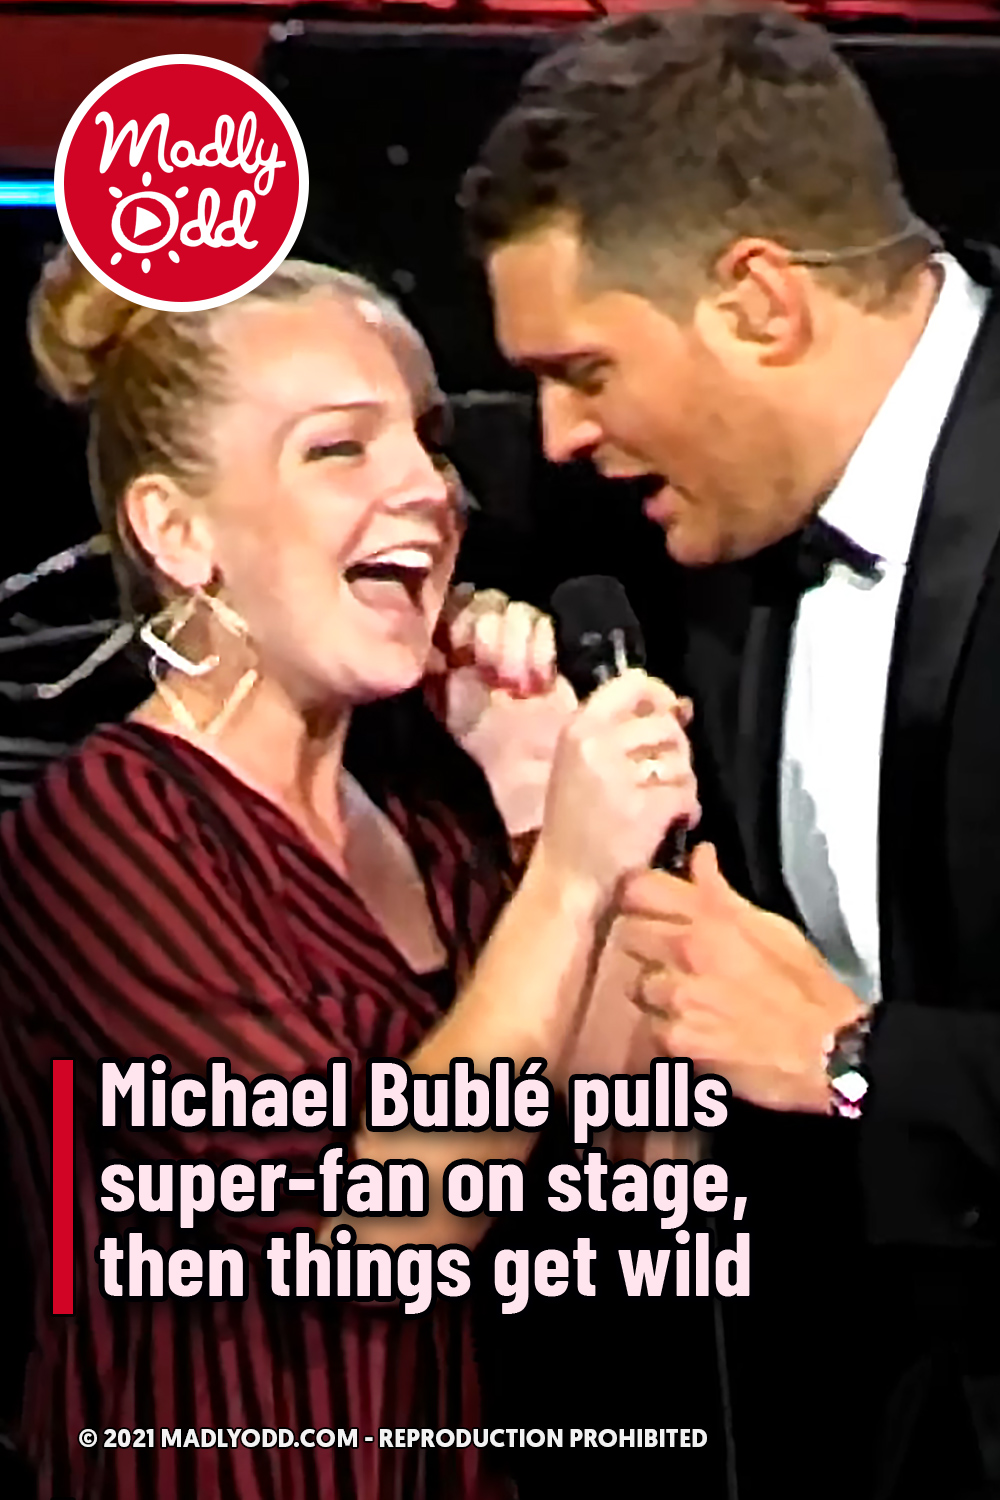 Michael Bublé pulls super-fan on stage, then things get wild